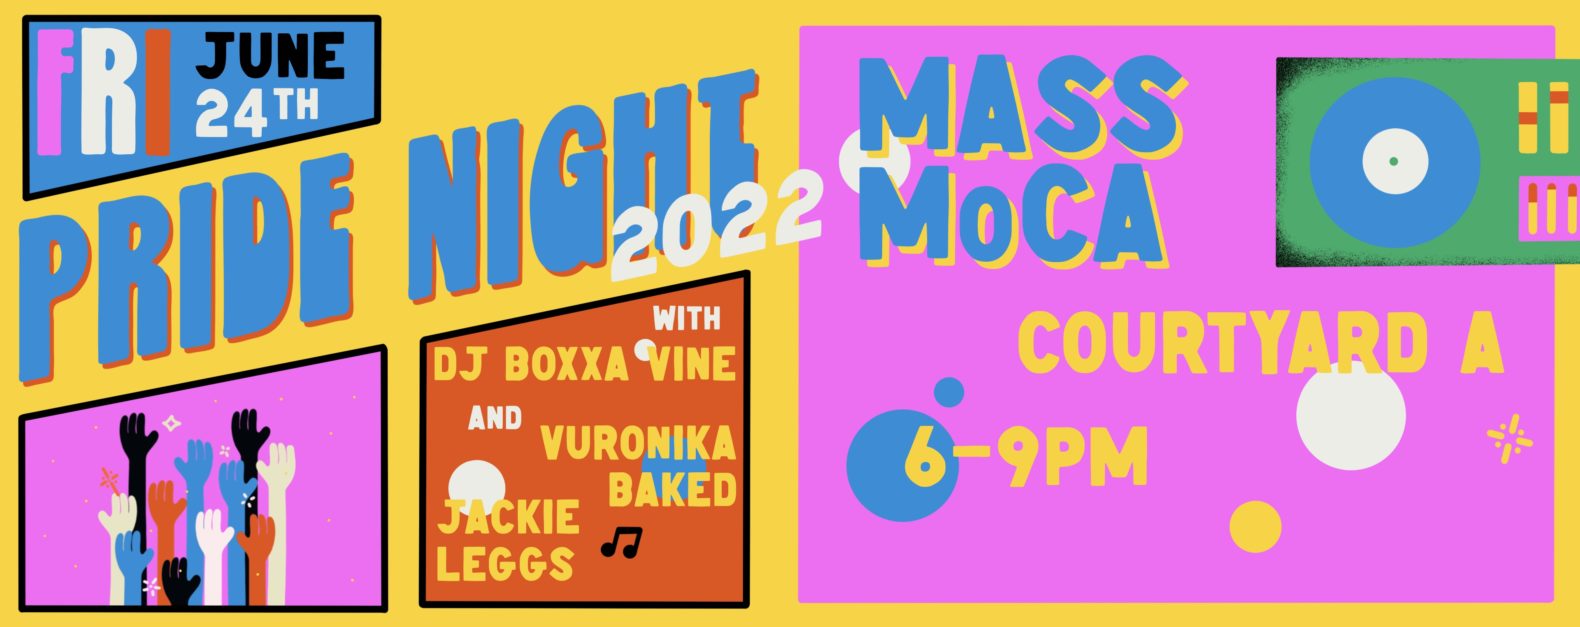 Pride Night 2022, Friday, June 24th, MASS MoCA Courtyard A, with DJ Boxxa Vine and Vuronika Baked and Jackie Leggs